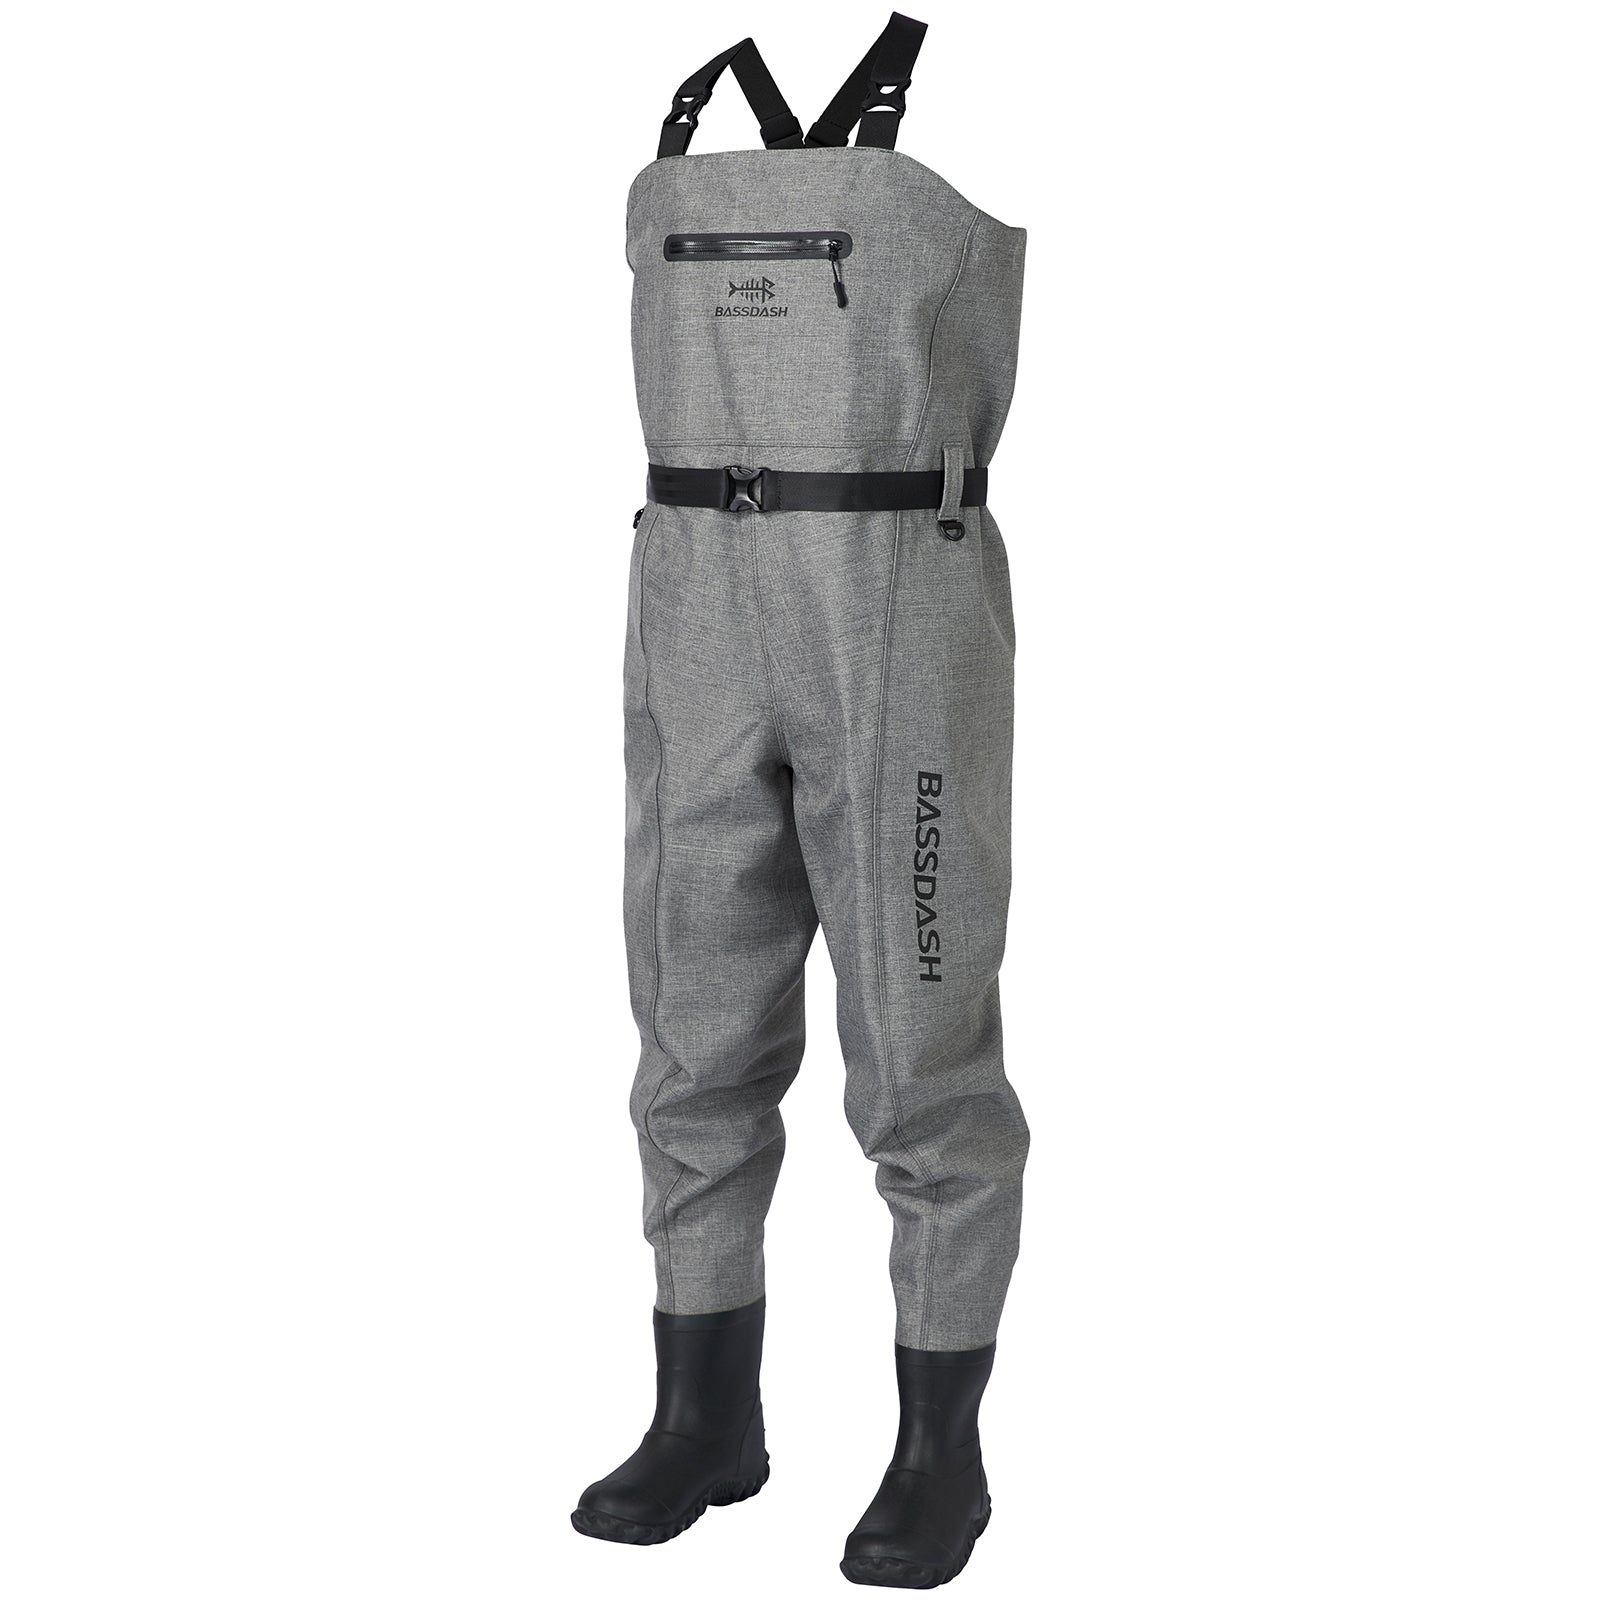 New Fishing Waders With Boots And Lightweight Pants Waterproof For